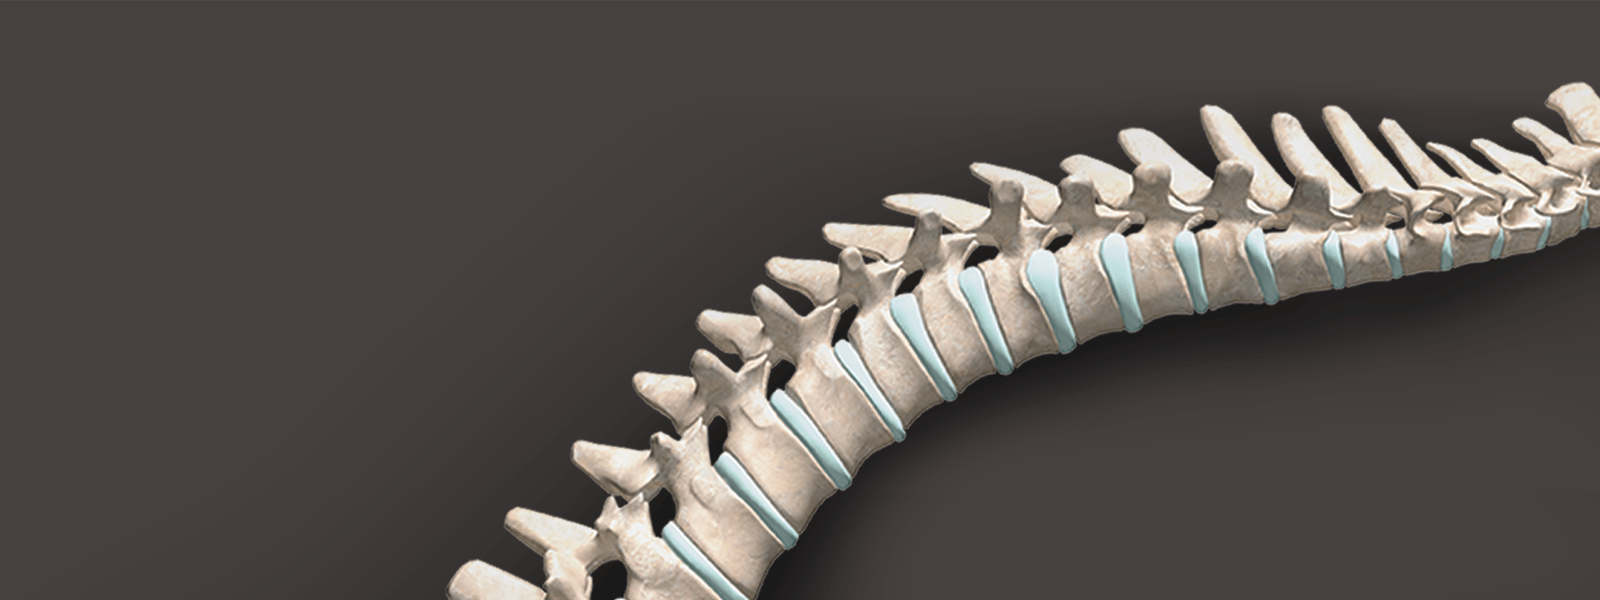 3D rendering of a spine